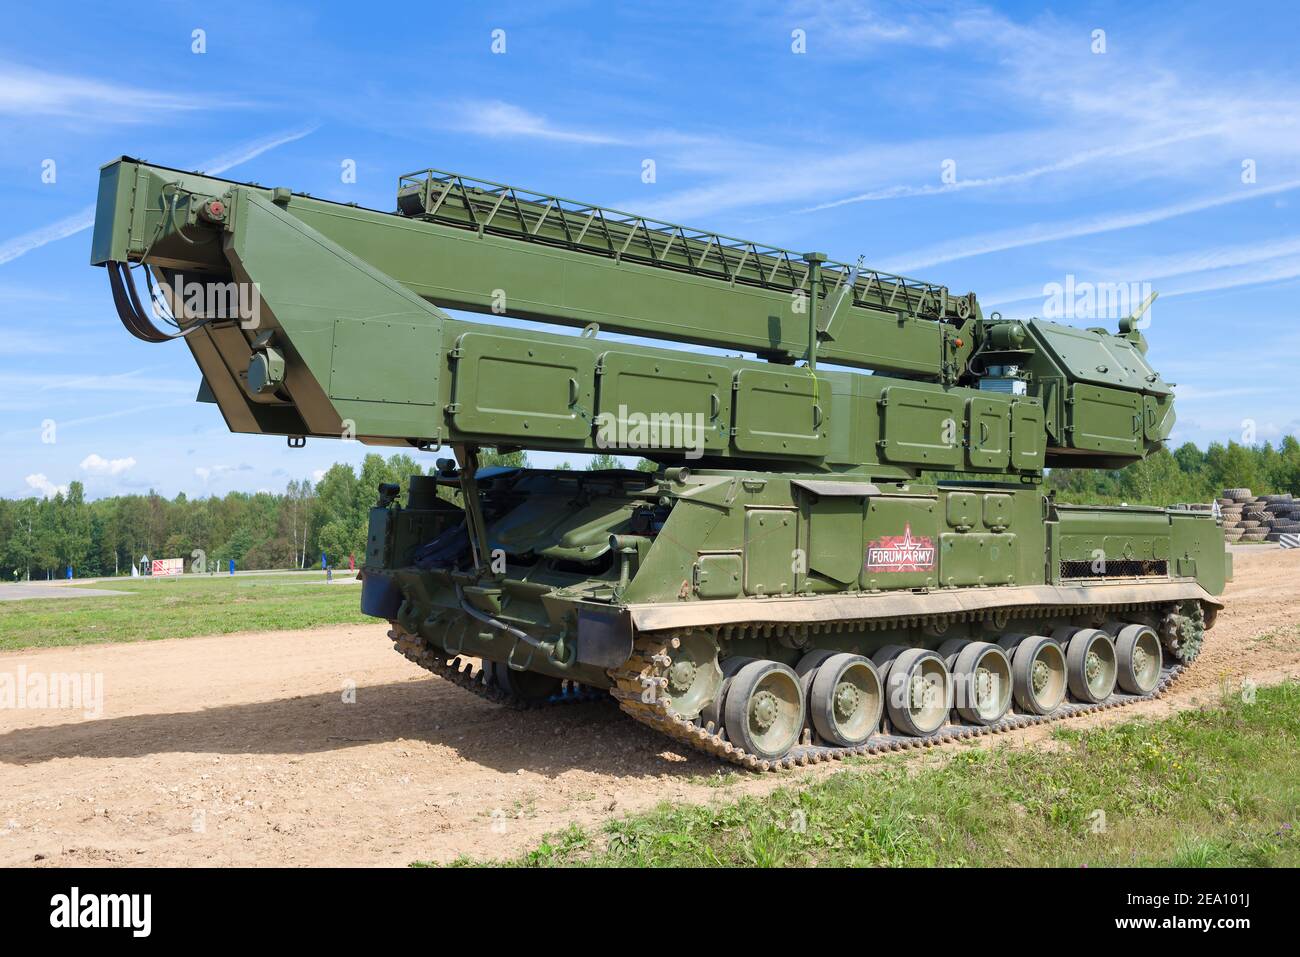 ALABINO, RUSSIA - AUGUST 25, 2020: Russian 9S36 missile guidance radar of the 9K317 Buk-M2 anti-aircraft missile system before the start of the demons Stock Photo